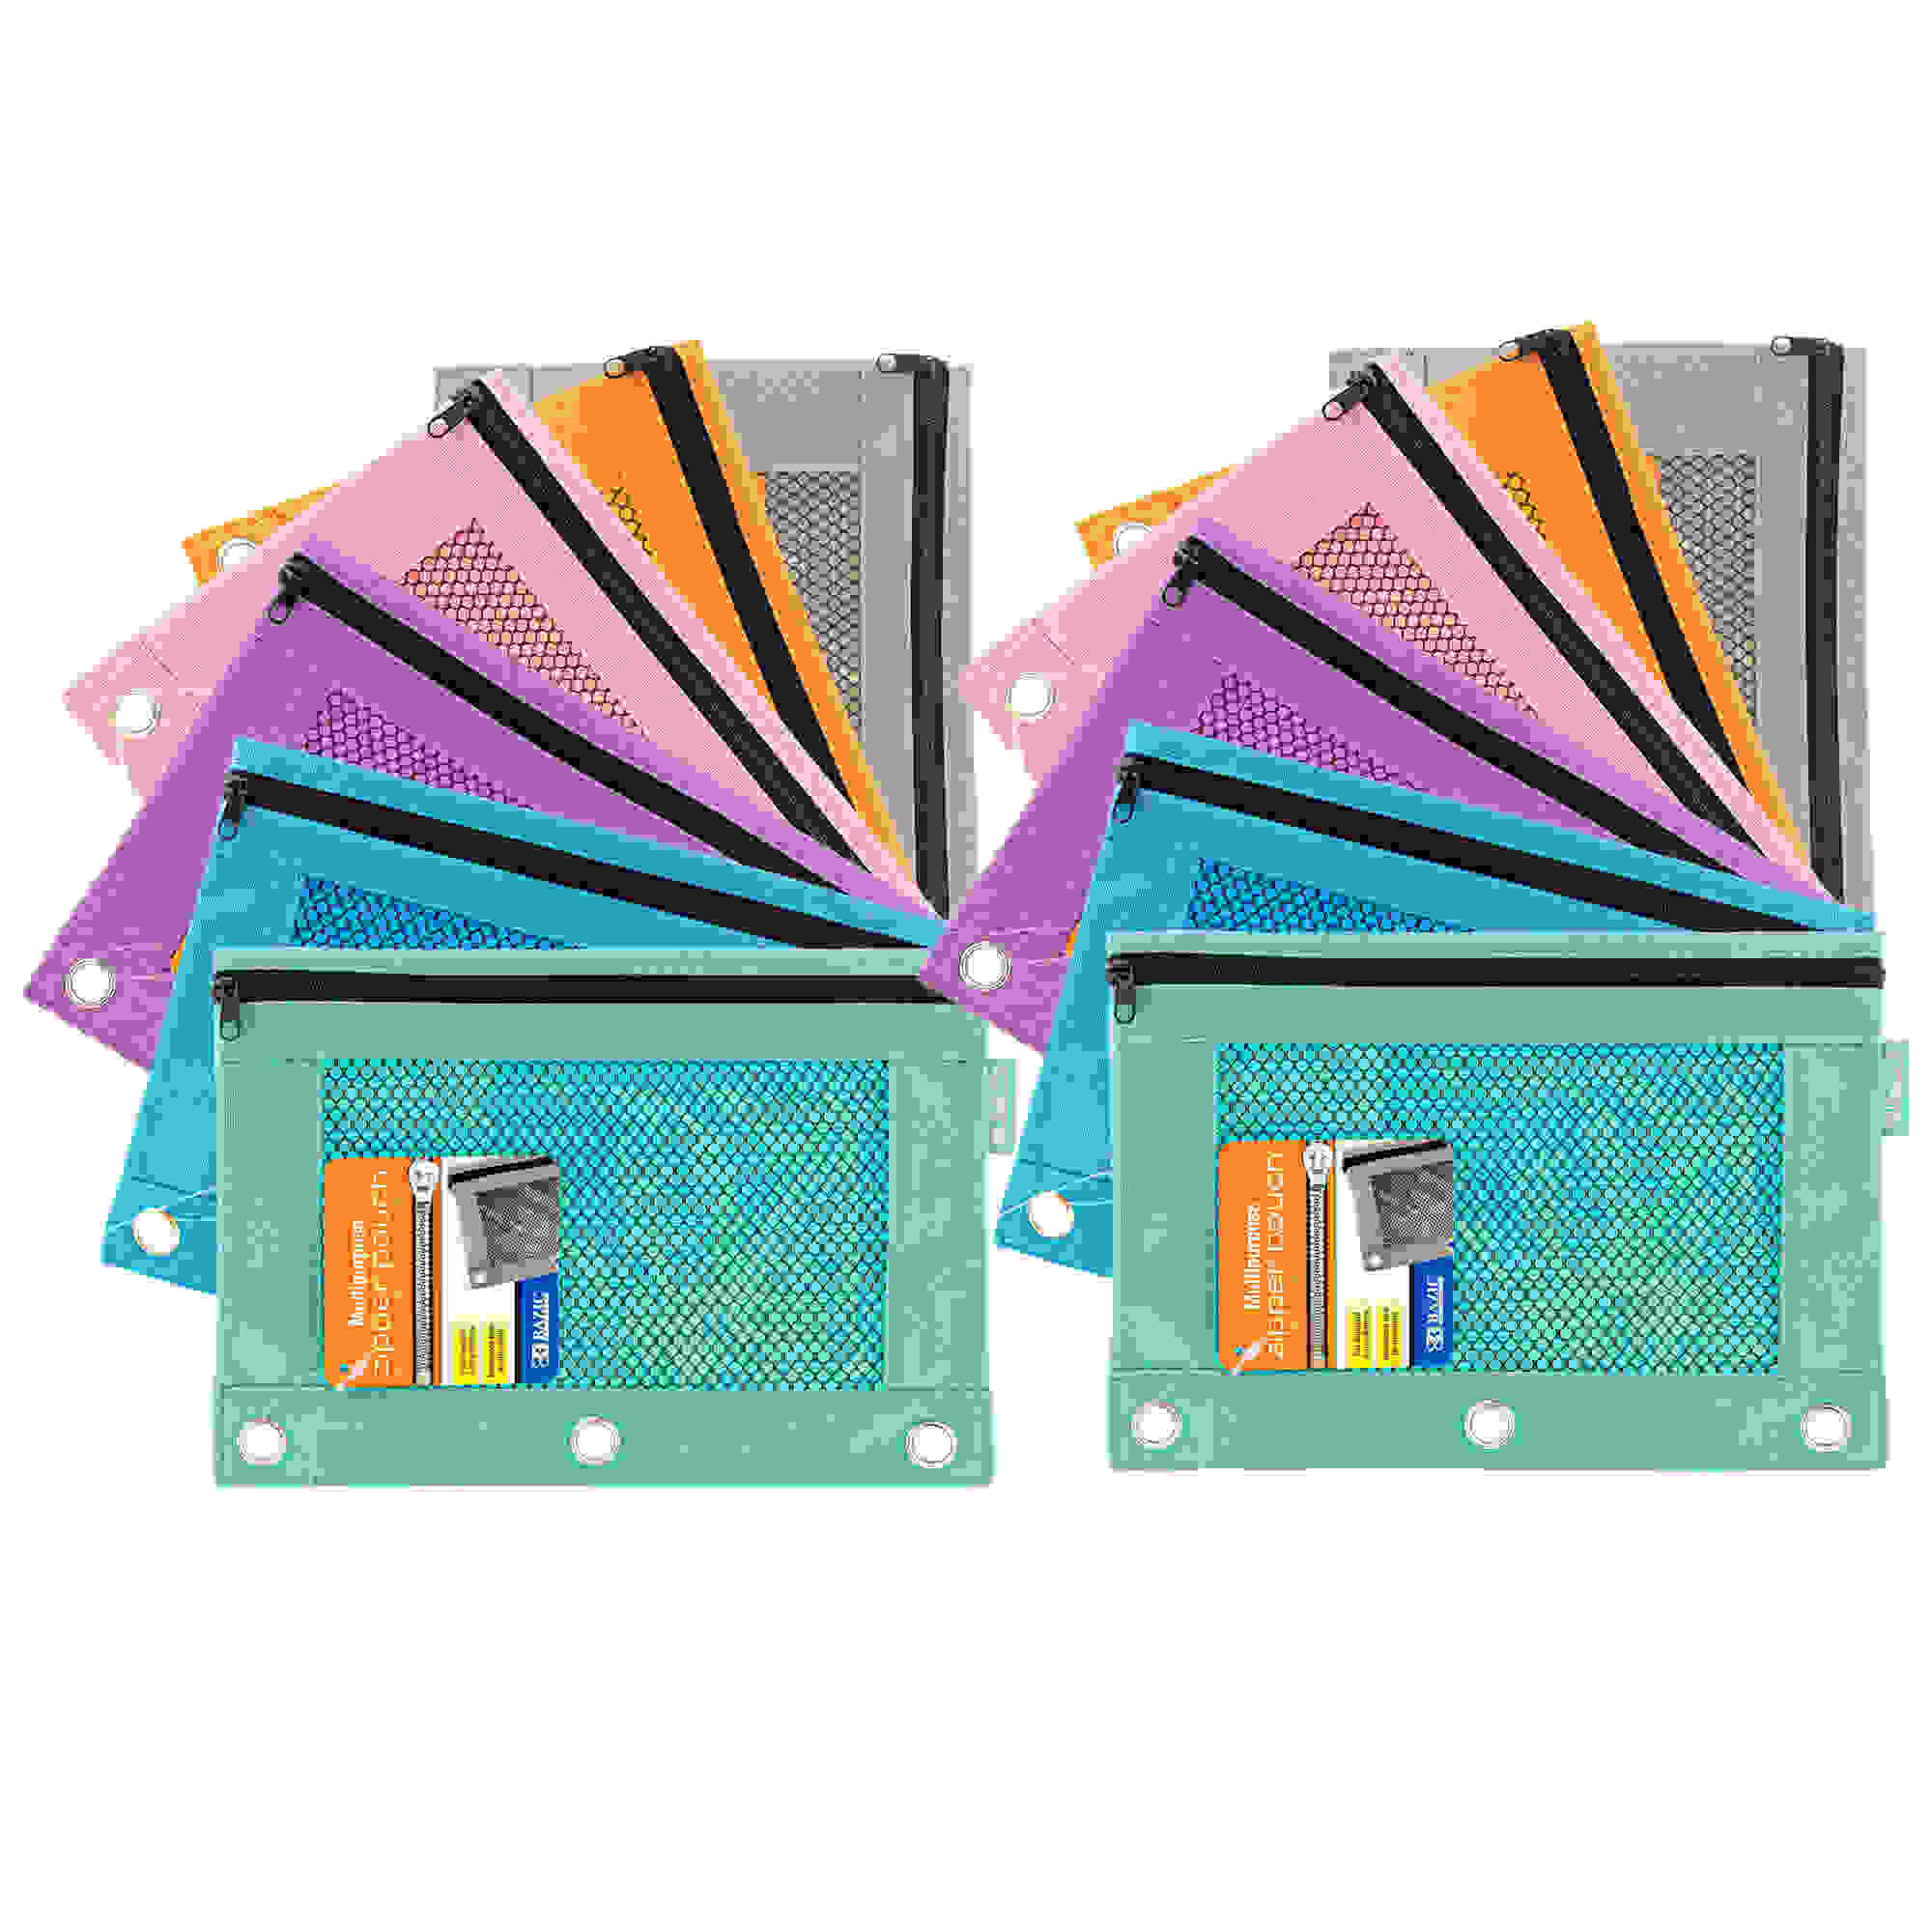 3-Ring Pencil Pouch with Mesh Window, Retro Pastel Colors, Pack of 12